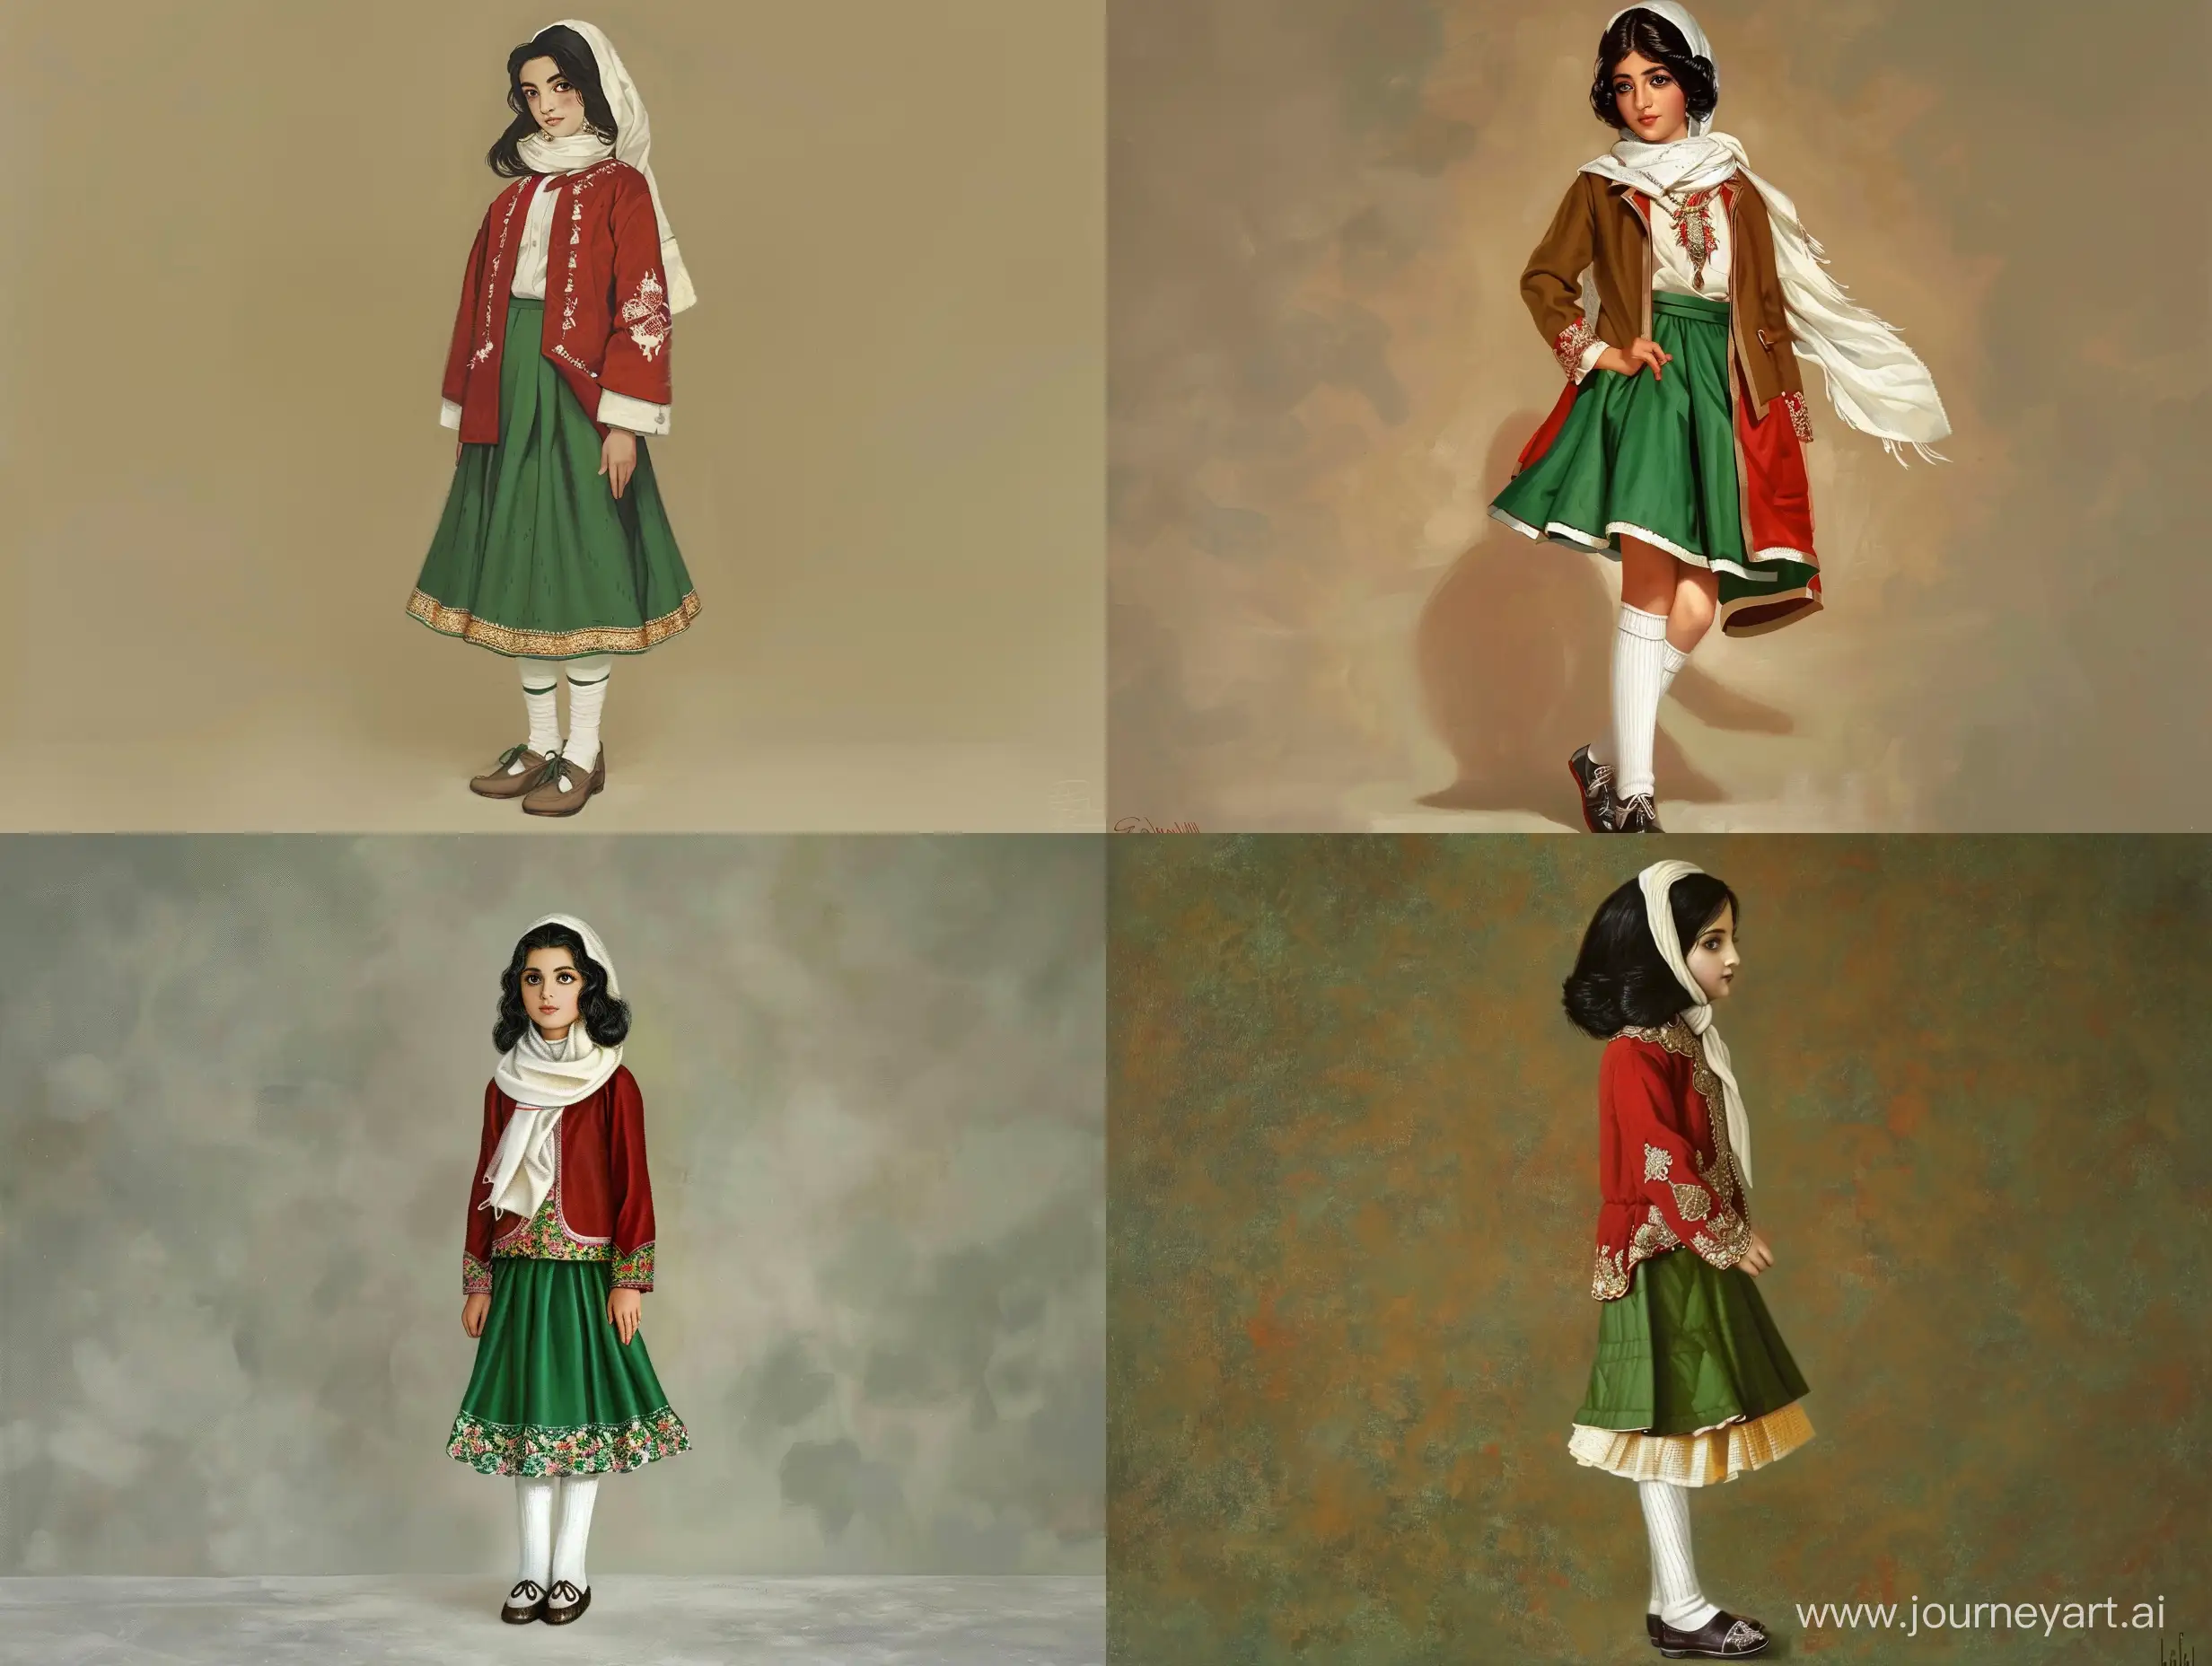 generate the ghajari girl painting who is standing and wore a green skirt and white socks with traditional red coat. here hair is black and a white silk scarf on her hair. pay attention to be as close as possible to the Miniature iranian paintings